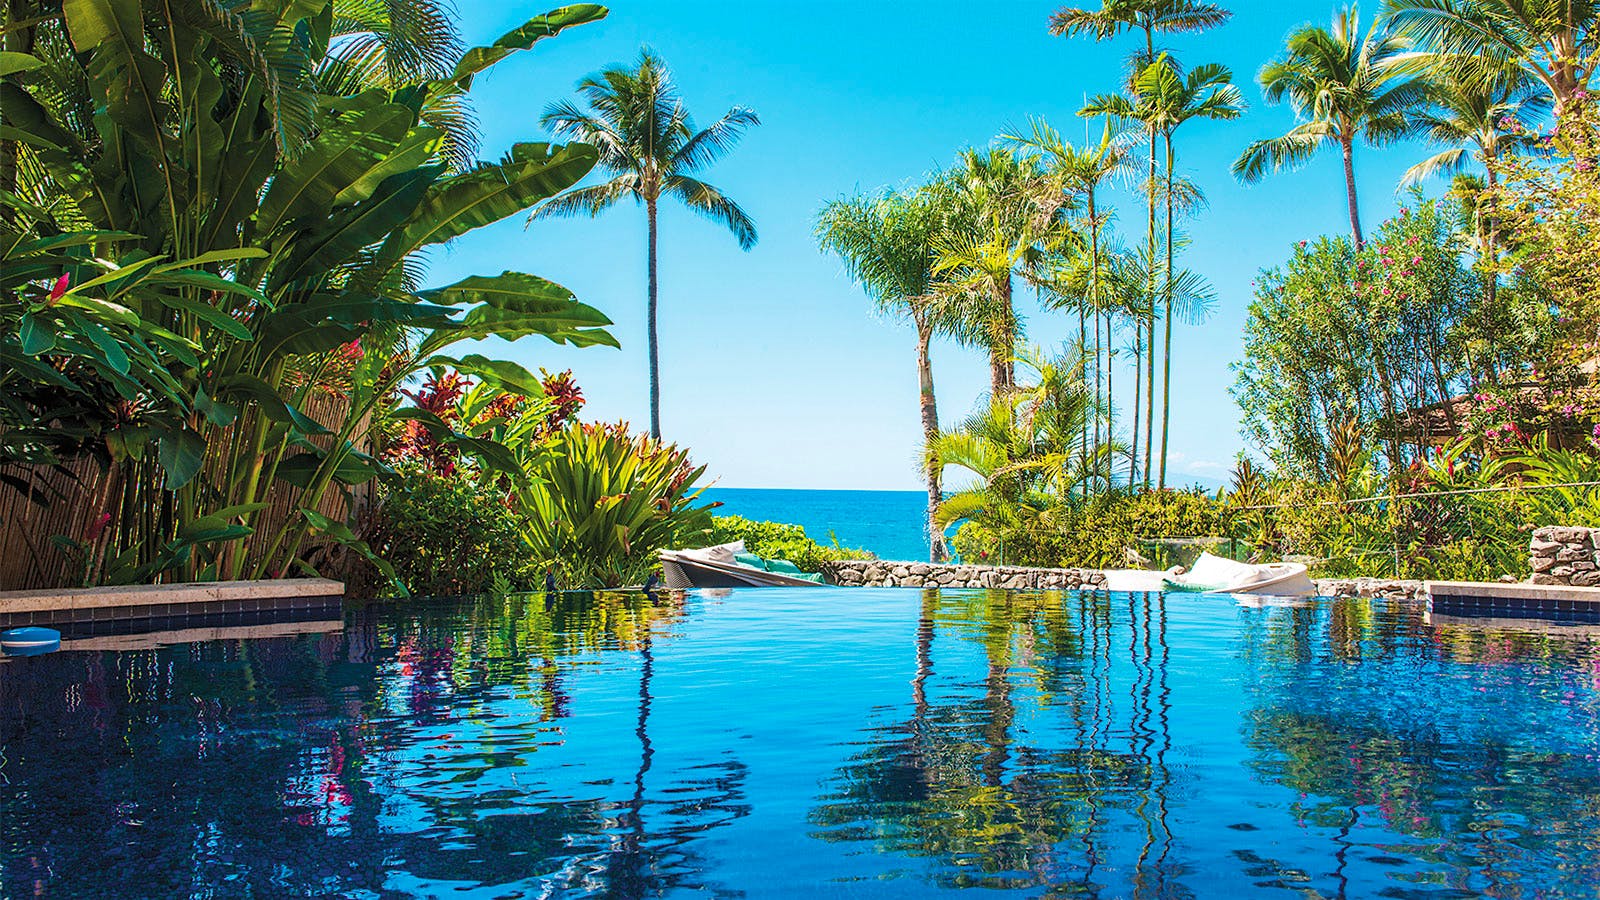 Infinity pool surrounded by tall palm trees and facing the Pacific Ocean